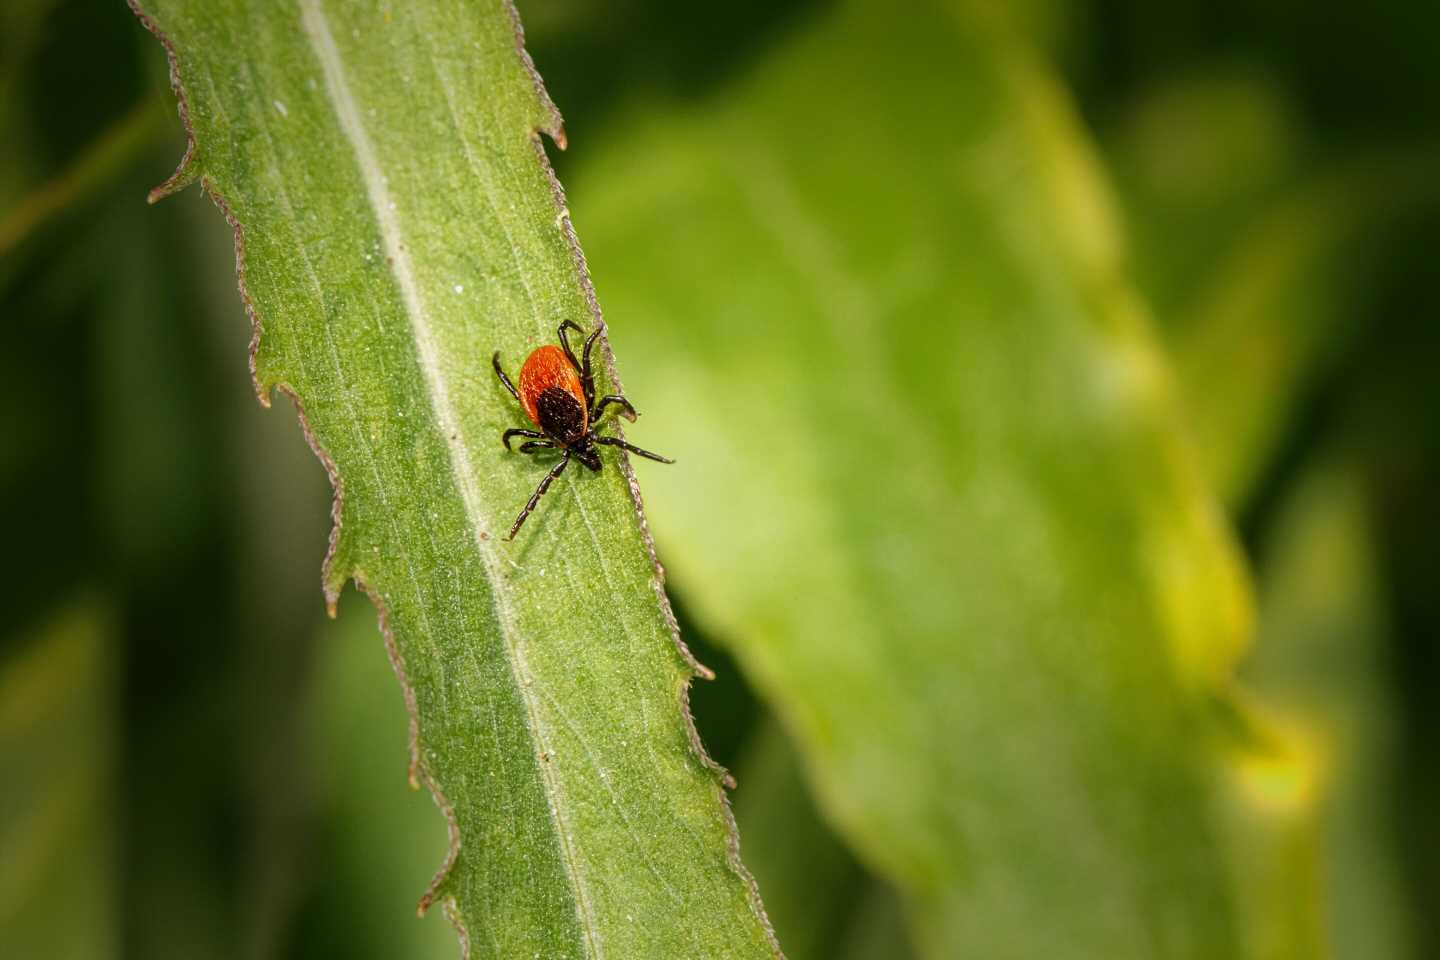 This tick season, beware the tiny bugs that can carry Lyme disease: A danger to the heart